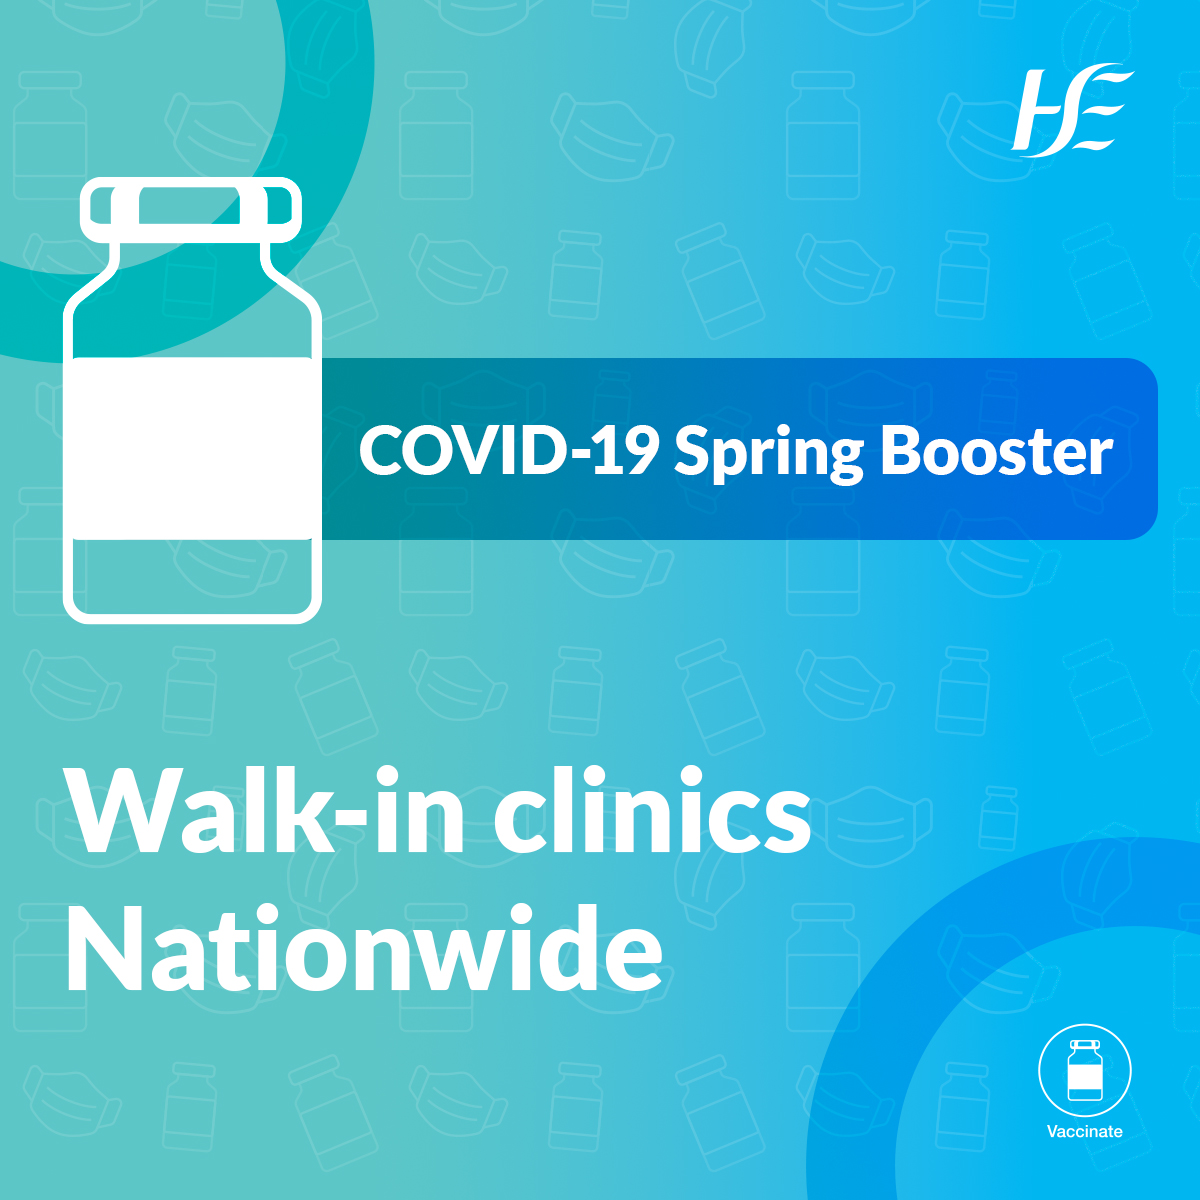 If you’re 70 or over or you have a weak immune system, you can get your COVID-19 Spring Booster at a walk-in vaccination clinic today. No appointment needed. For clinic times and more information, visit: bit.ly/44VFXZd #COVIDVaccine